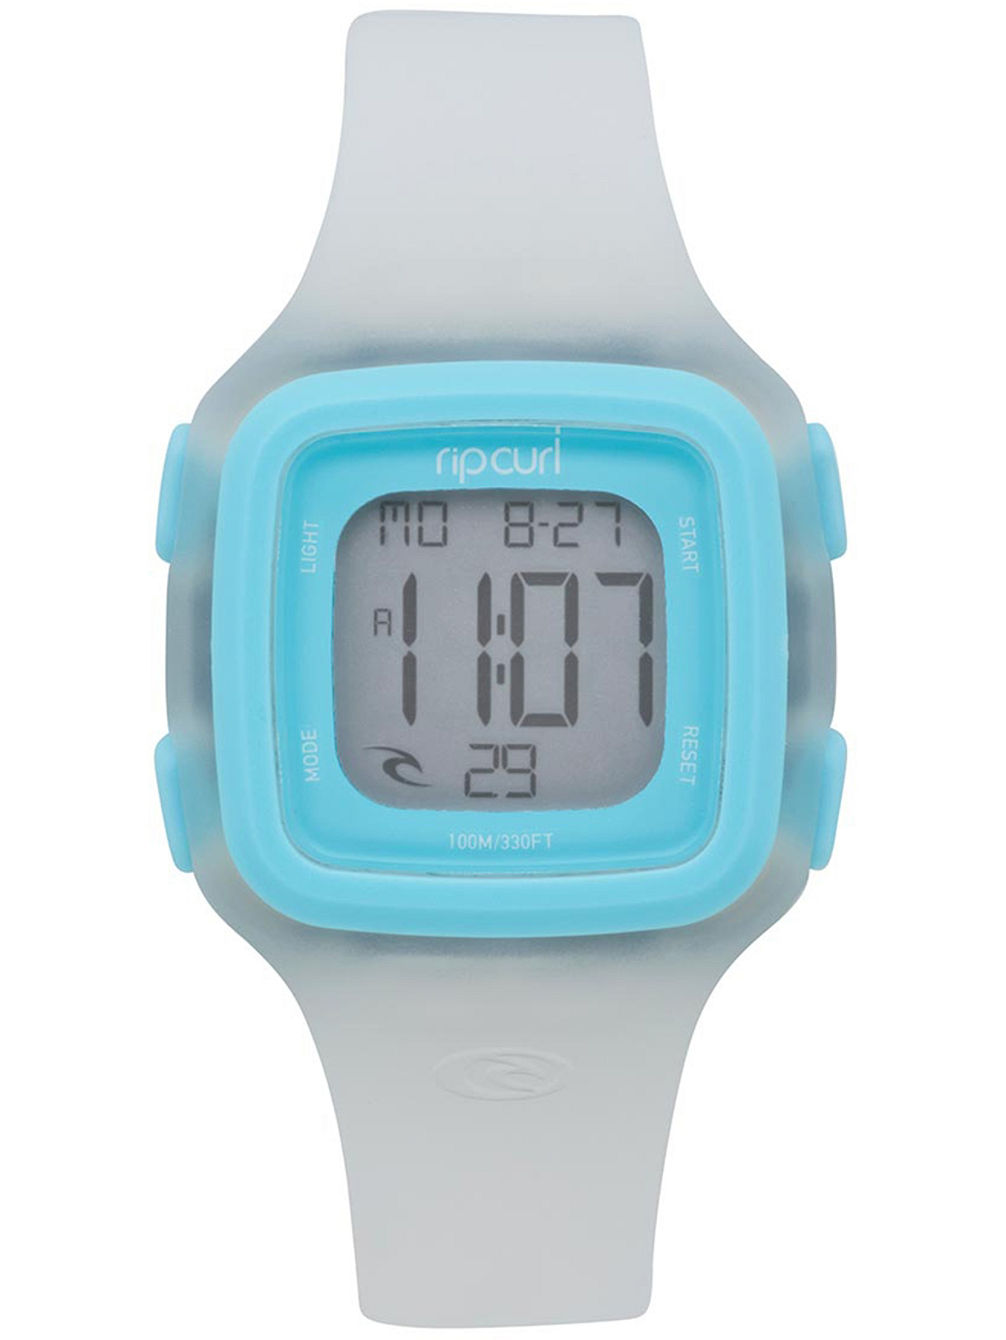 Candy2 Digital Silicone Montre